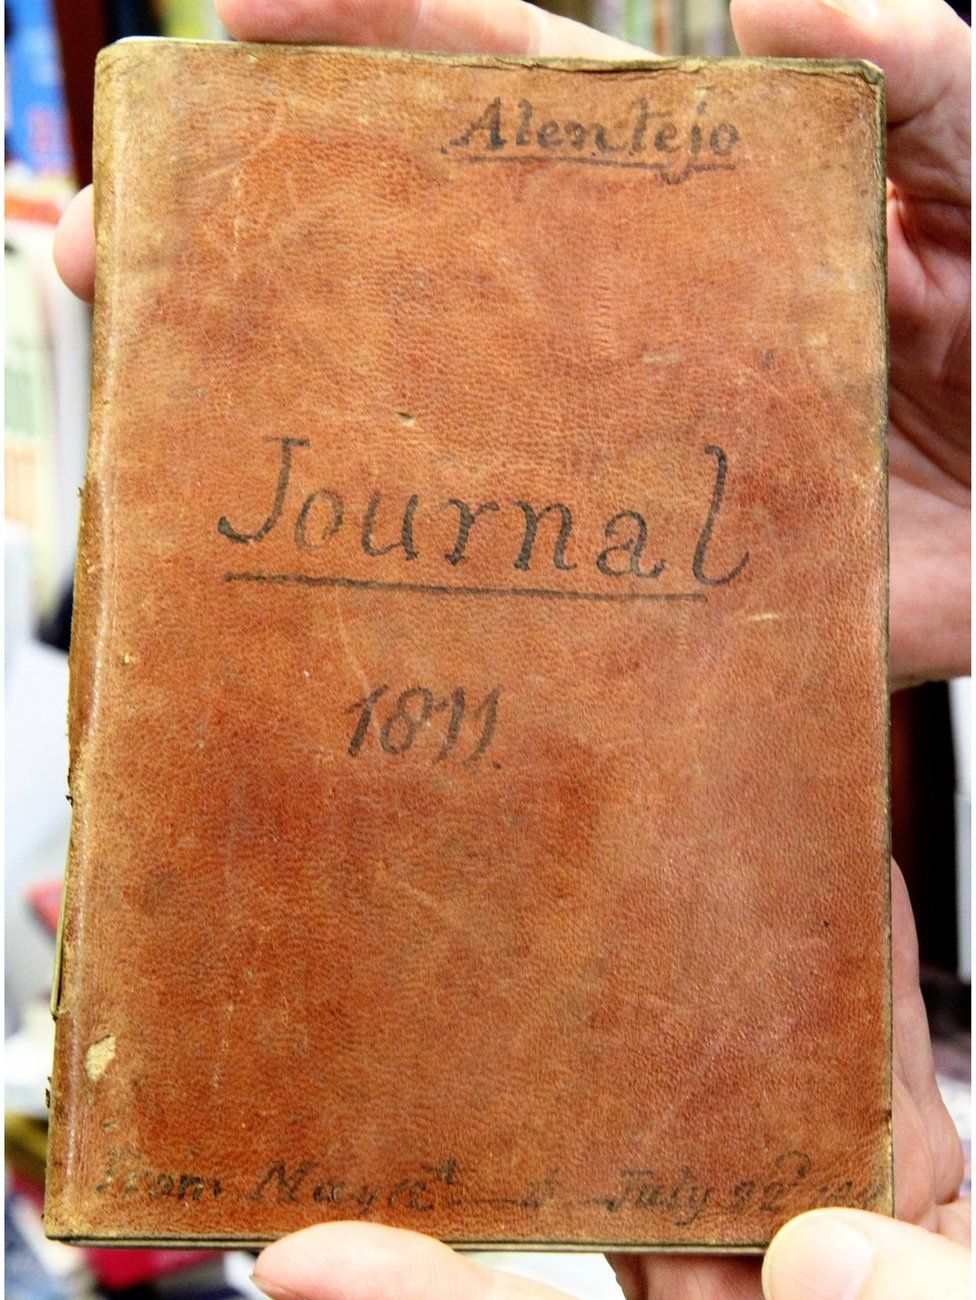 The journal's cover, reading 'journal 1611